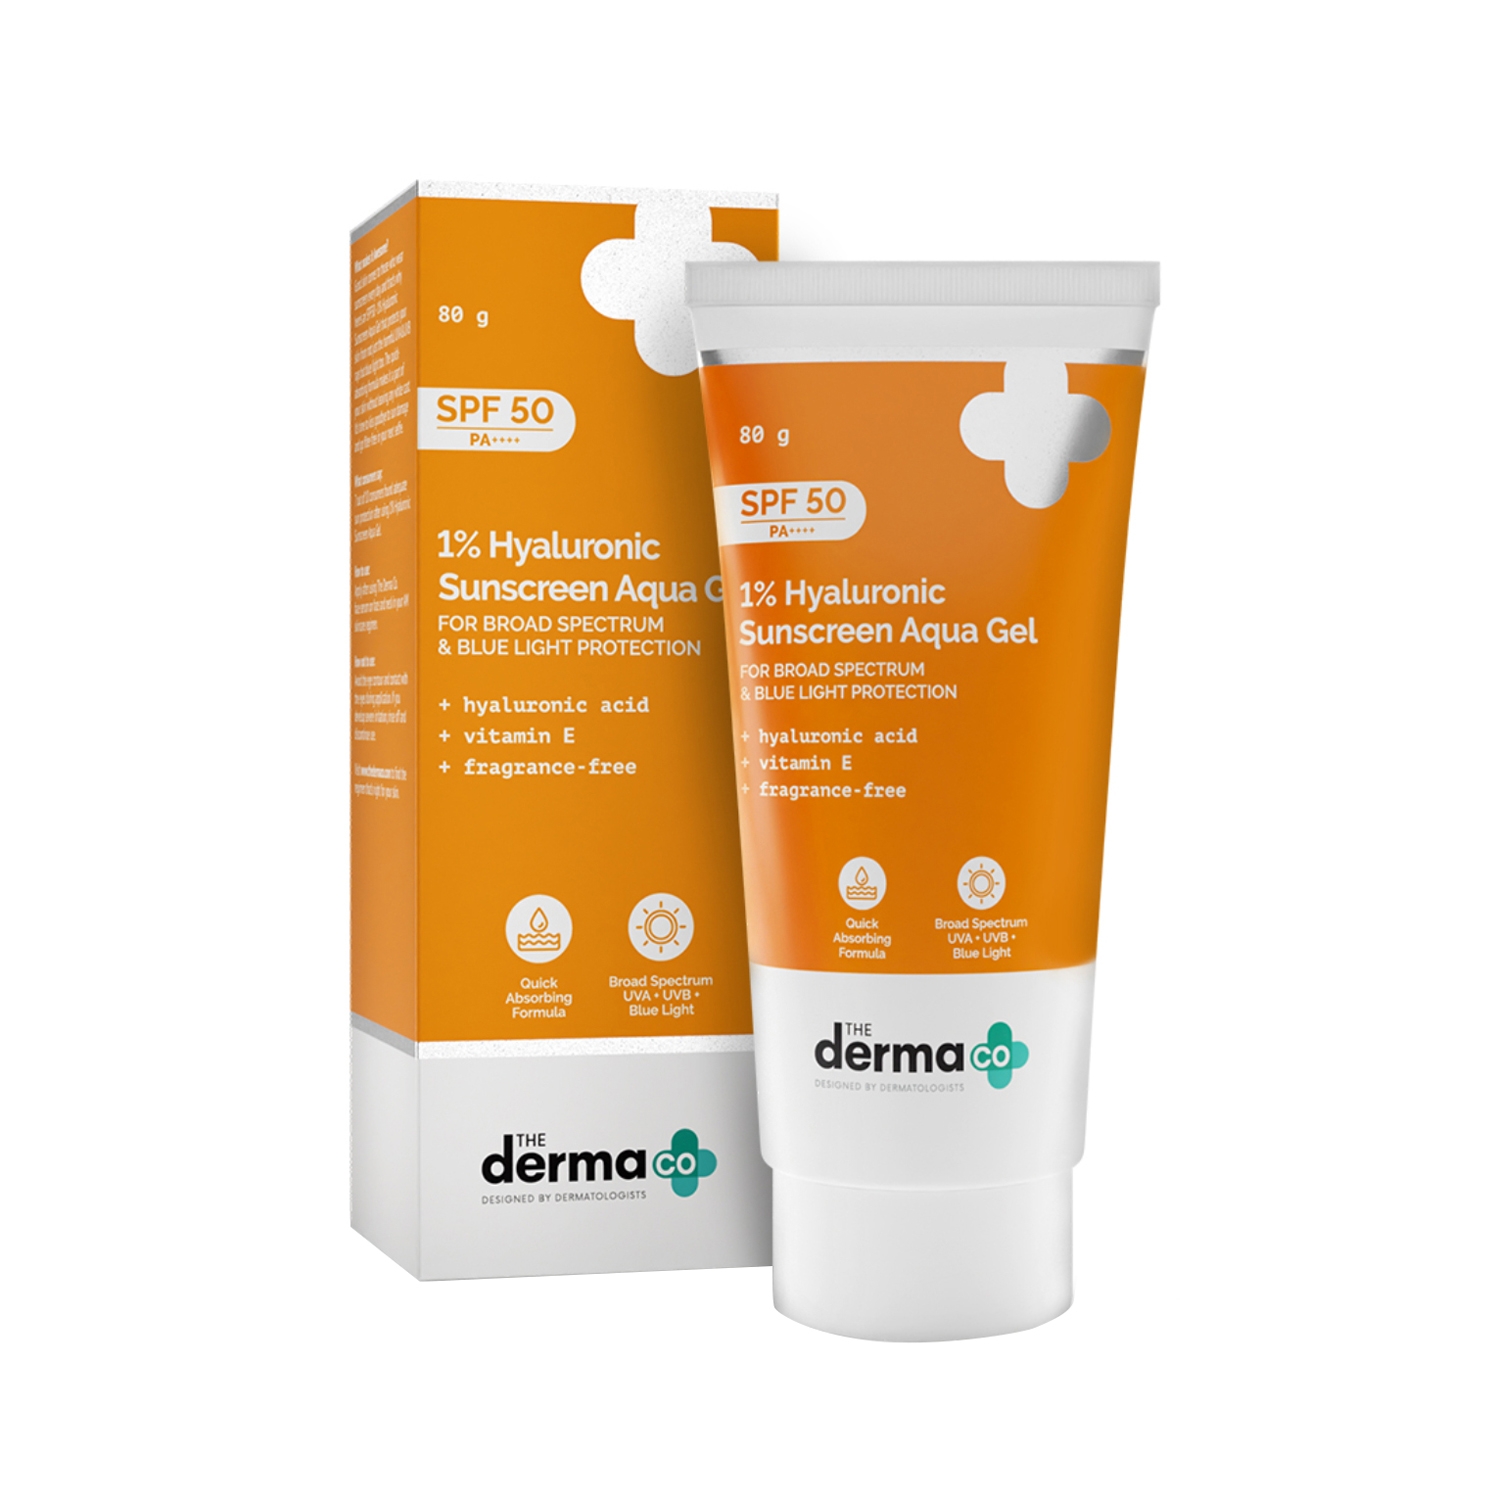 The Derma Co 1% Hyaluronic Sunscreen Aqua Gel With SPF 50 PA++ (80g)